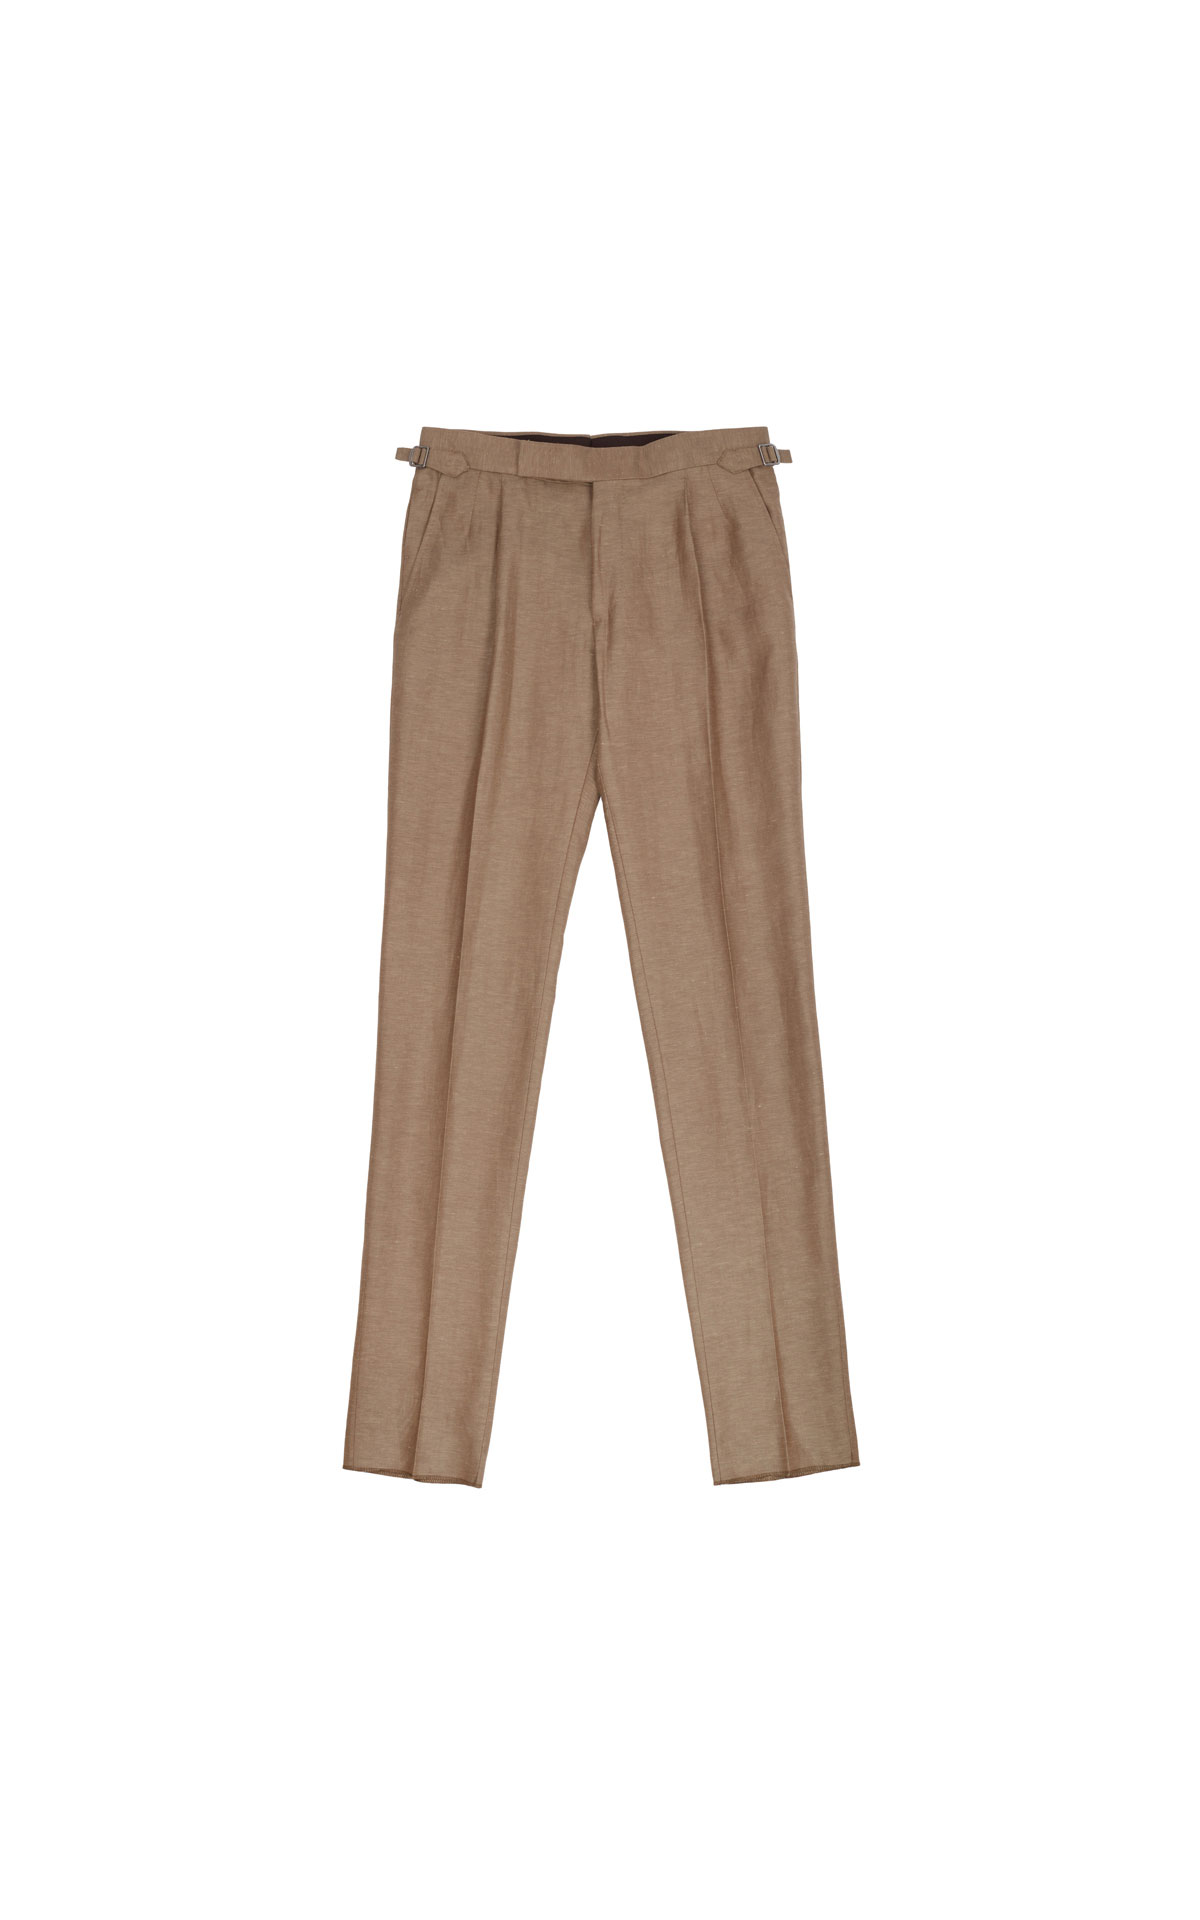 Zegna Trouser from Bicester Village